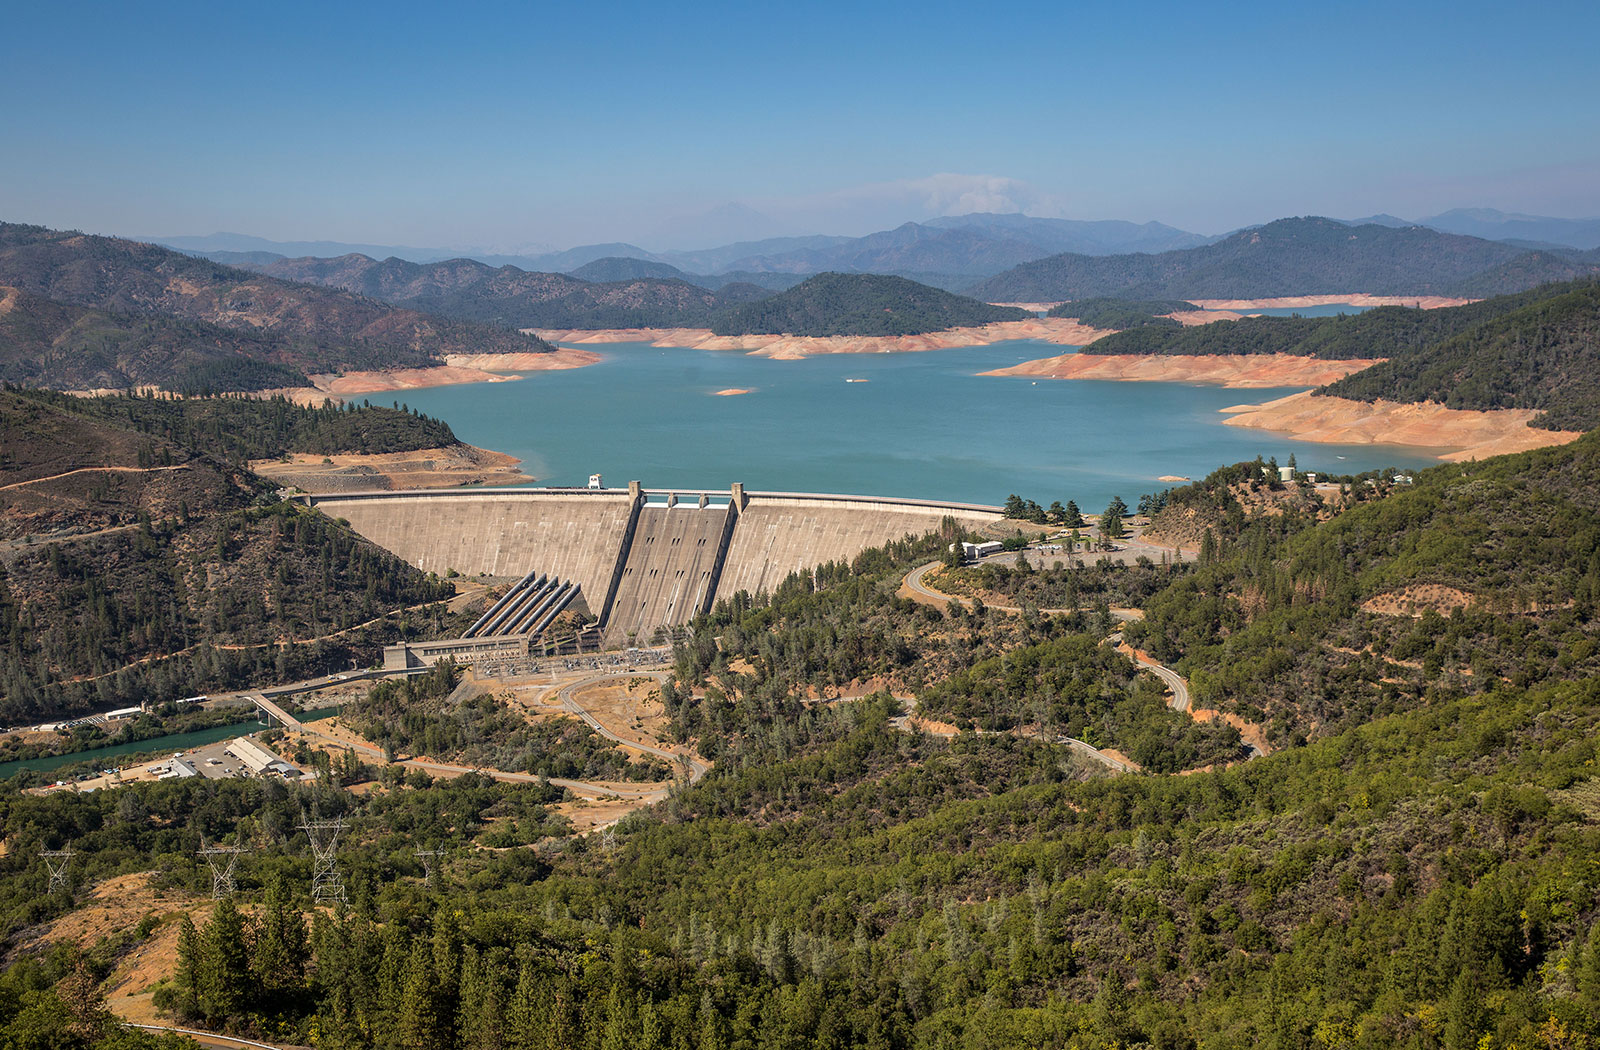 Shasta Lake, California's largest water reservoir, is at 37% of its total capacity.